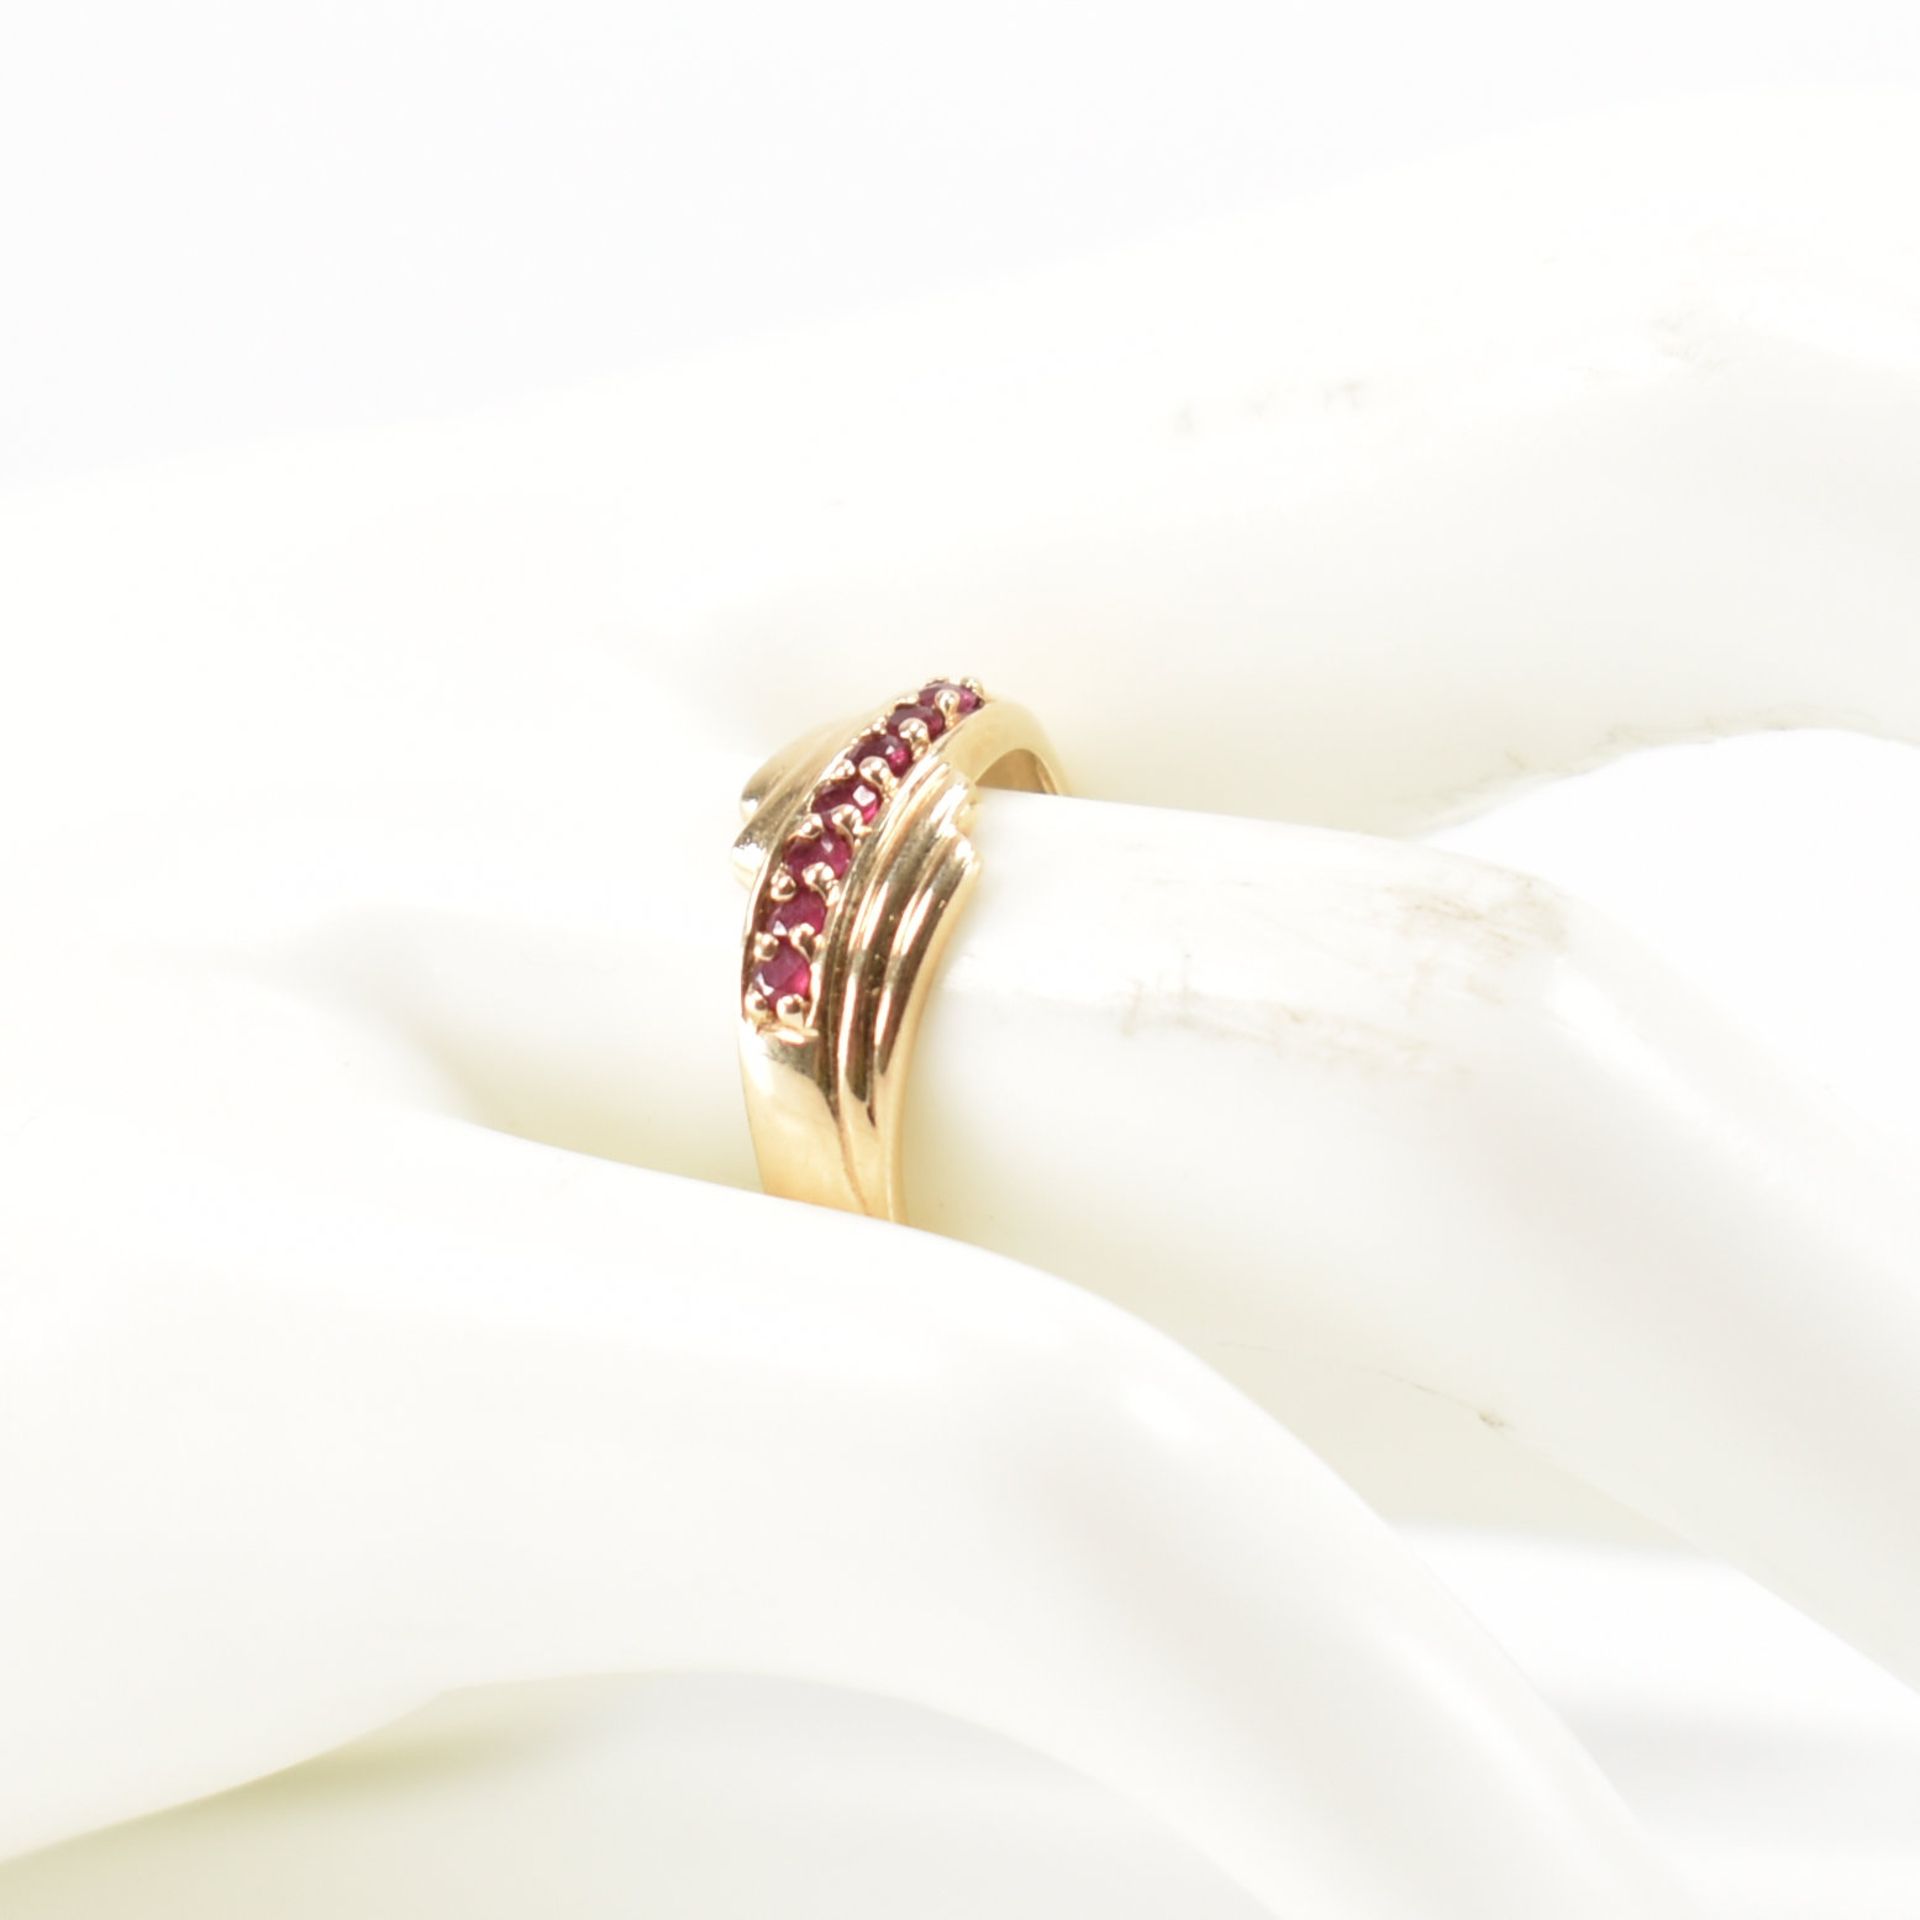 HALLMARKED 9CT GOLD RUBY RING - Image 8 of 8